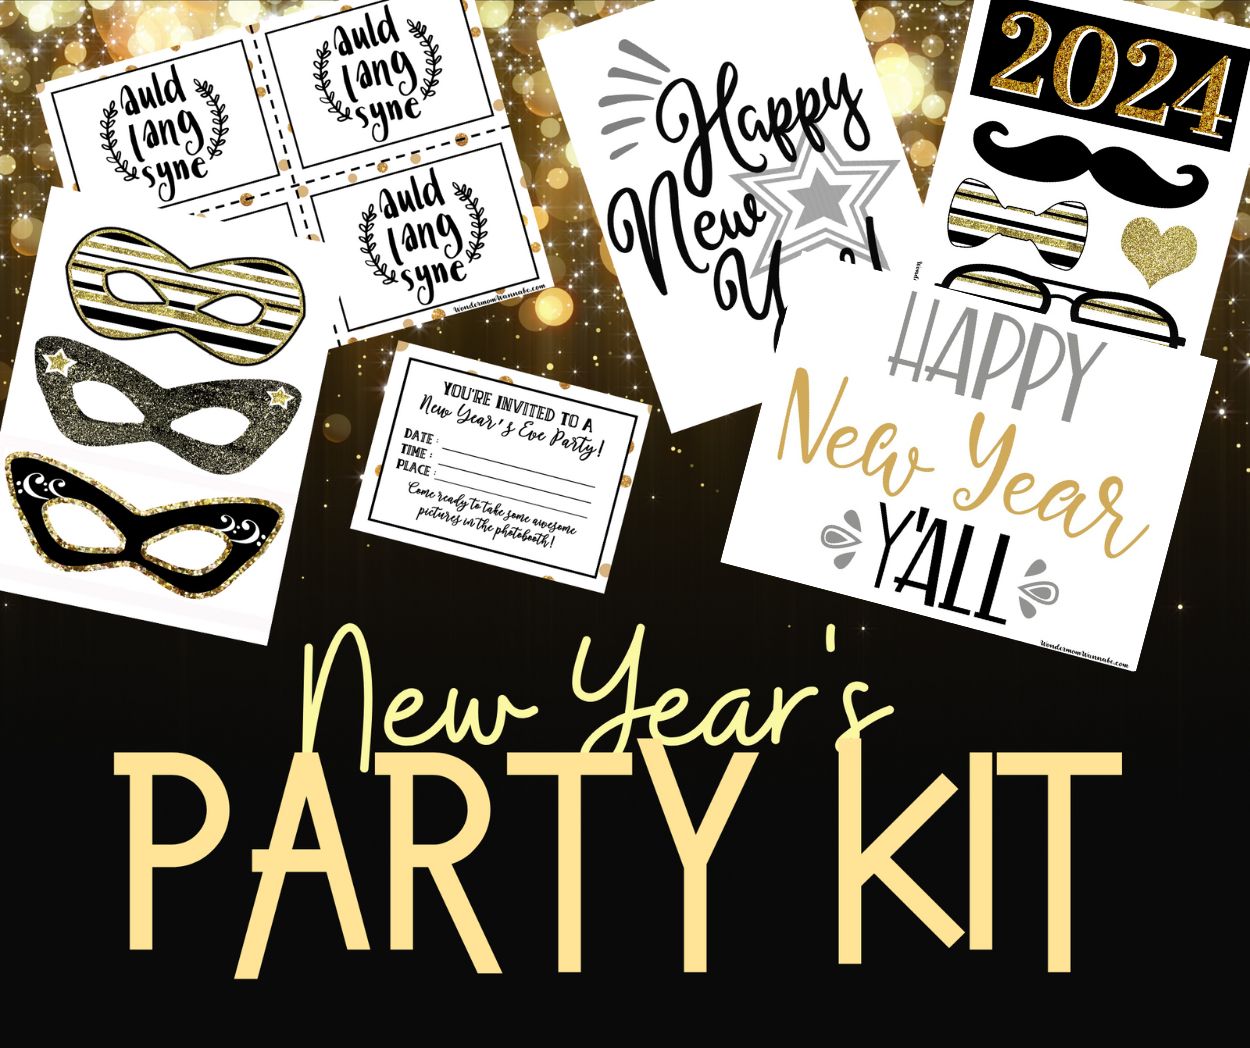 A festive new year's party kit featuring gold and black masks.